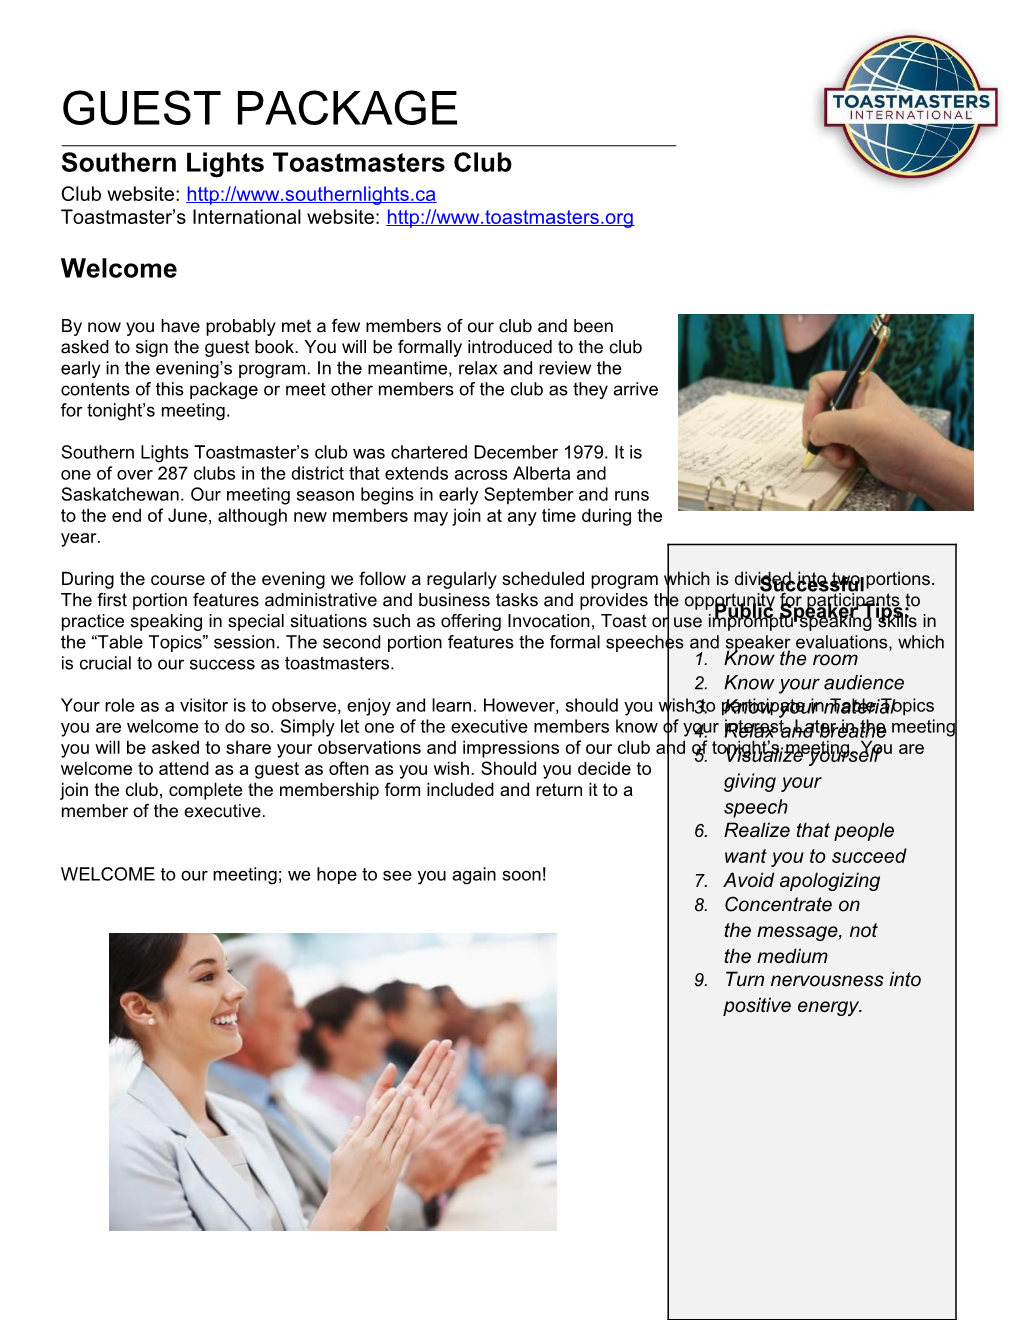 Southern Lights Toastmasters Club